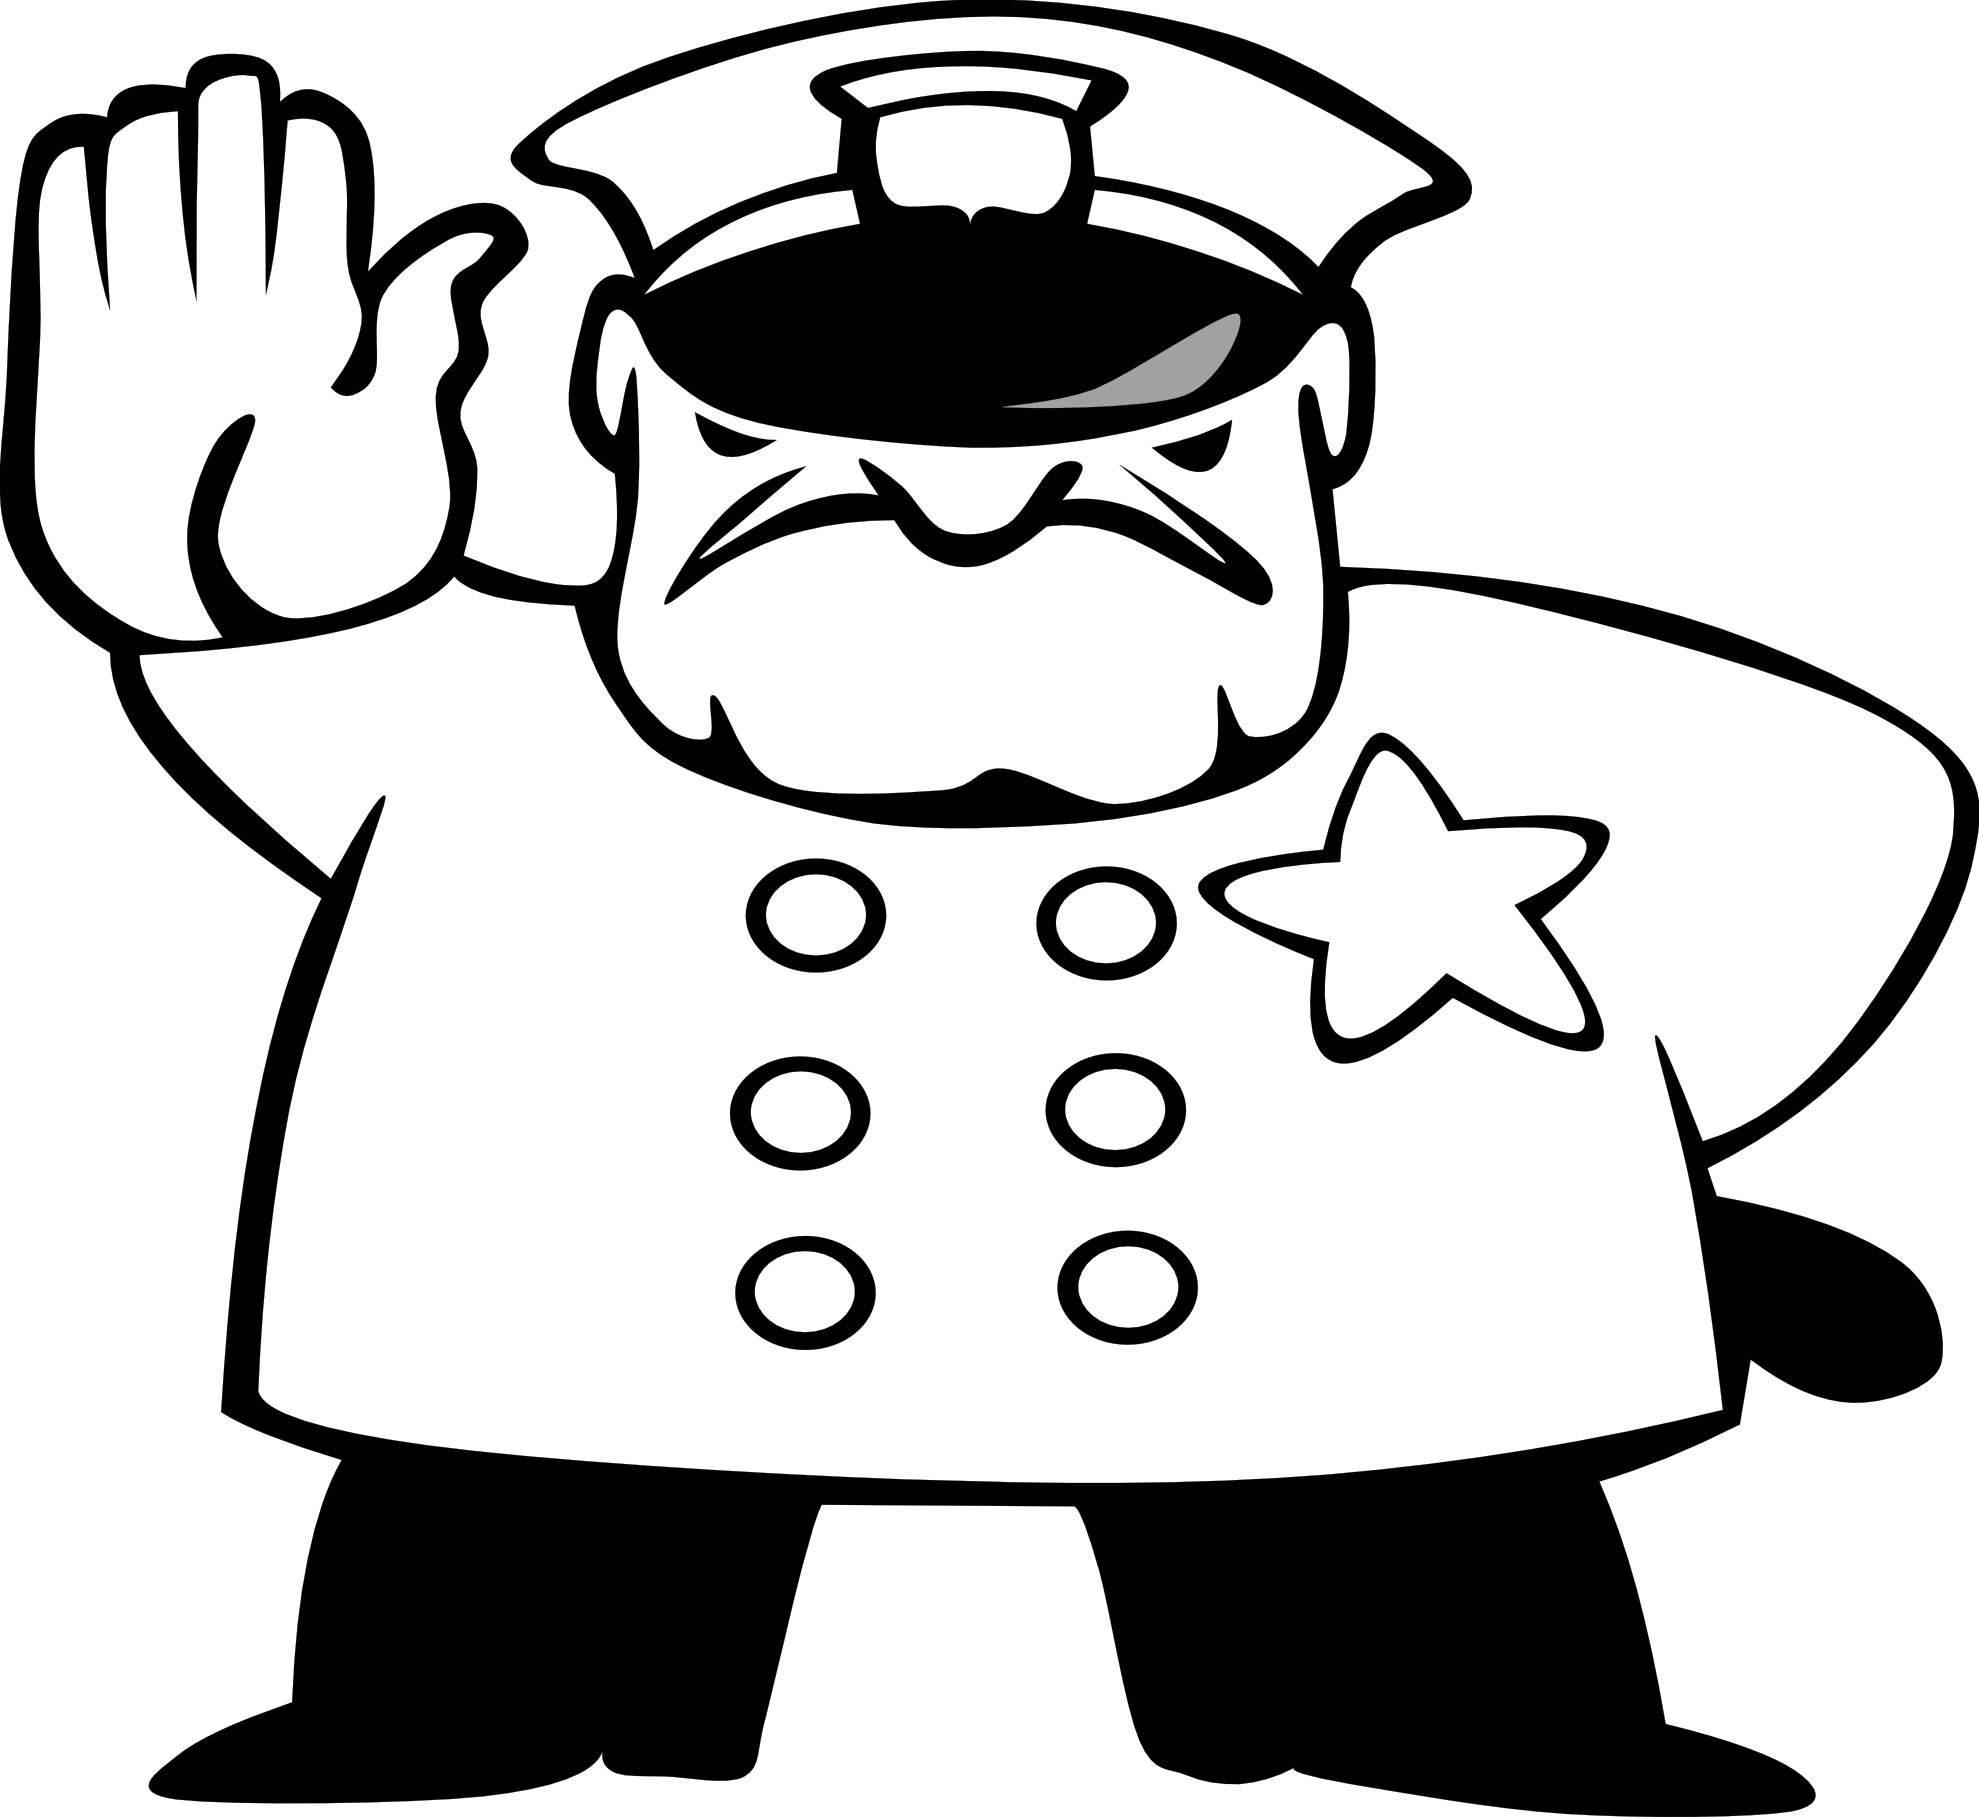 Free police man pictures. Geography clipart black and white